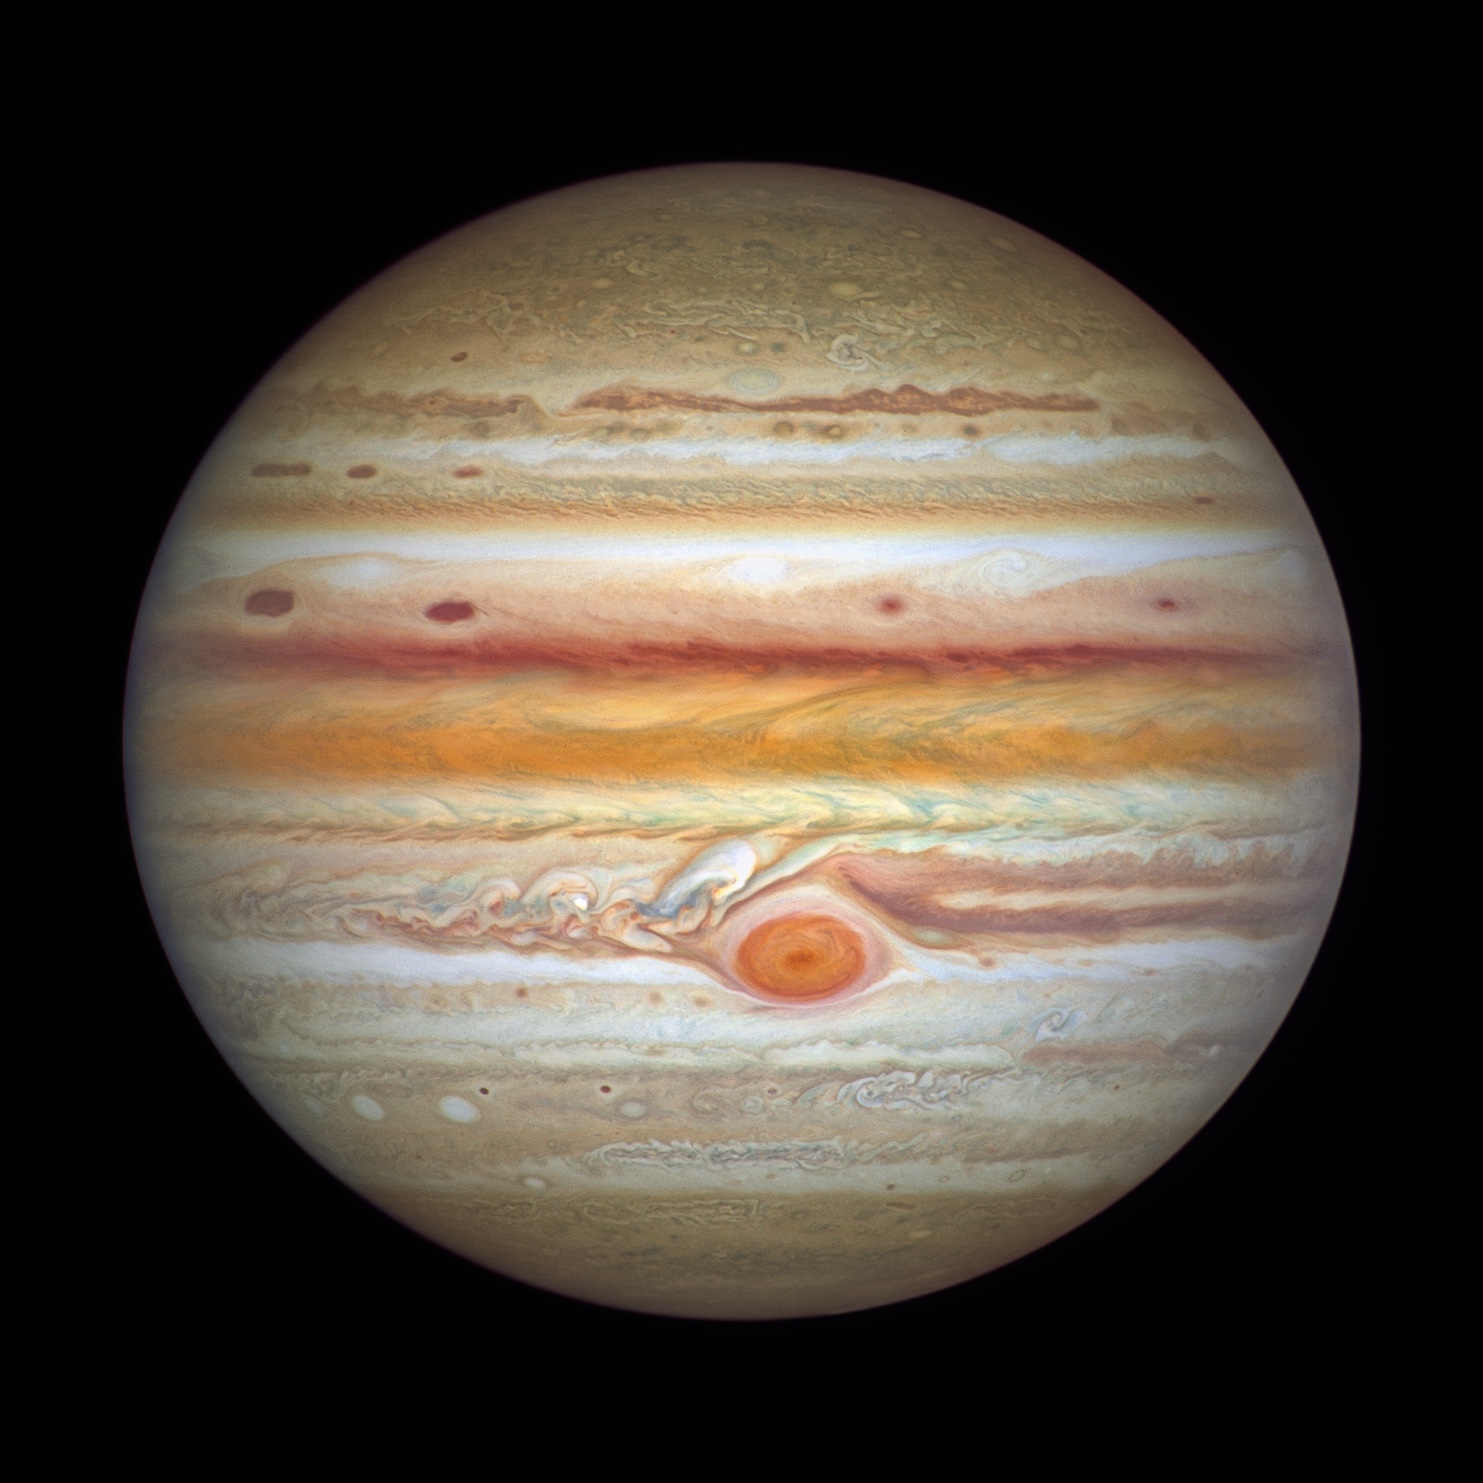 Jupiter picture by the Hubble Space Telescope